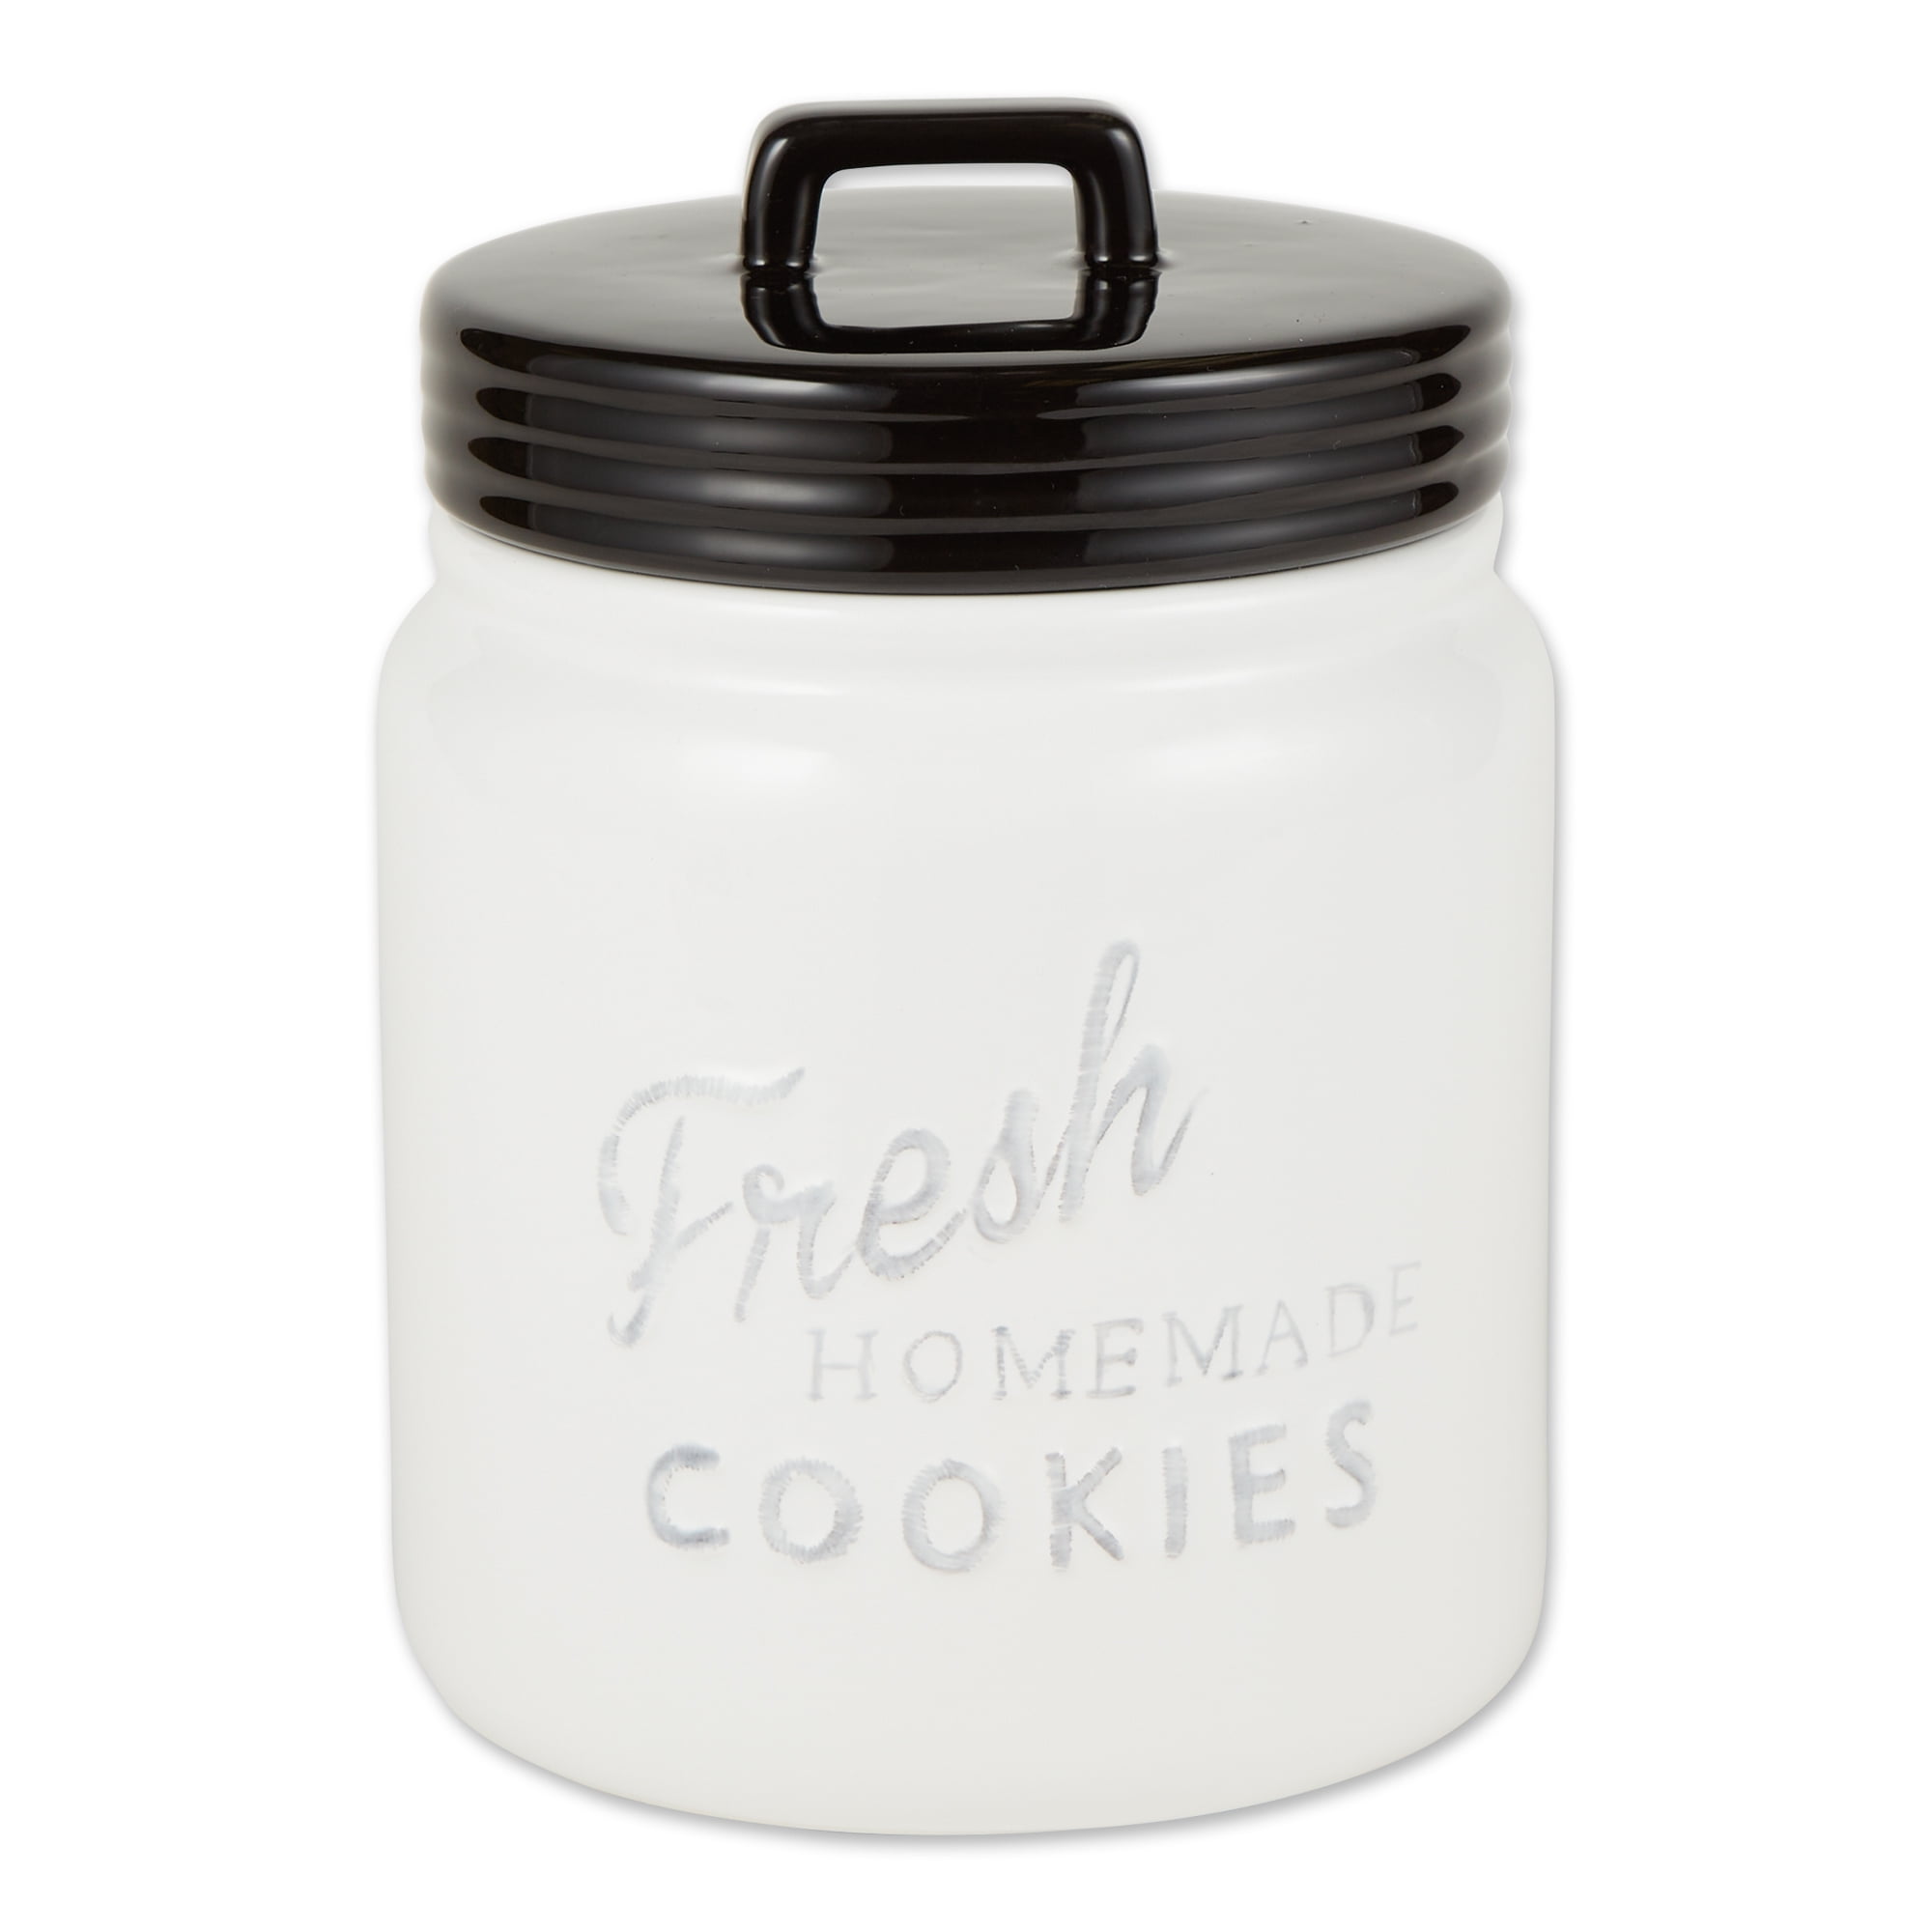 All You Need is Love and Cookies Ceramic Cookie Jar 8 Inch Tall 